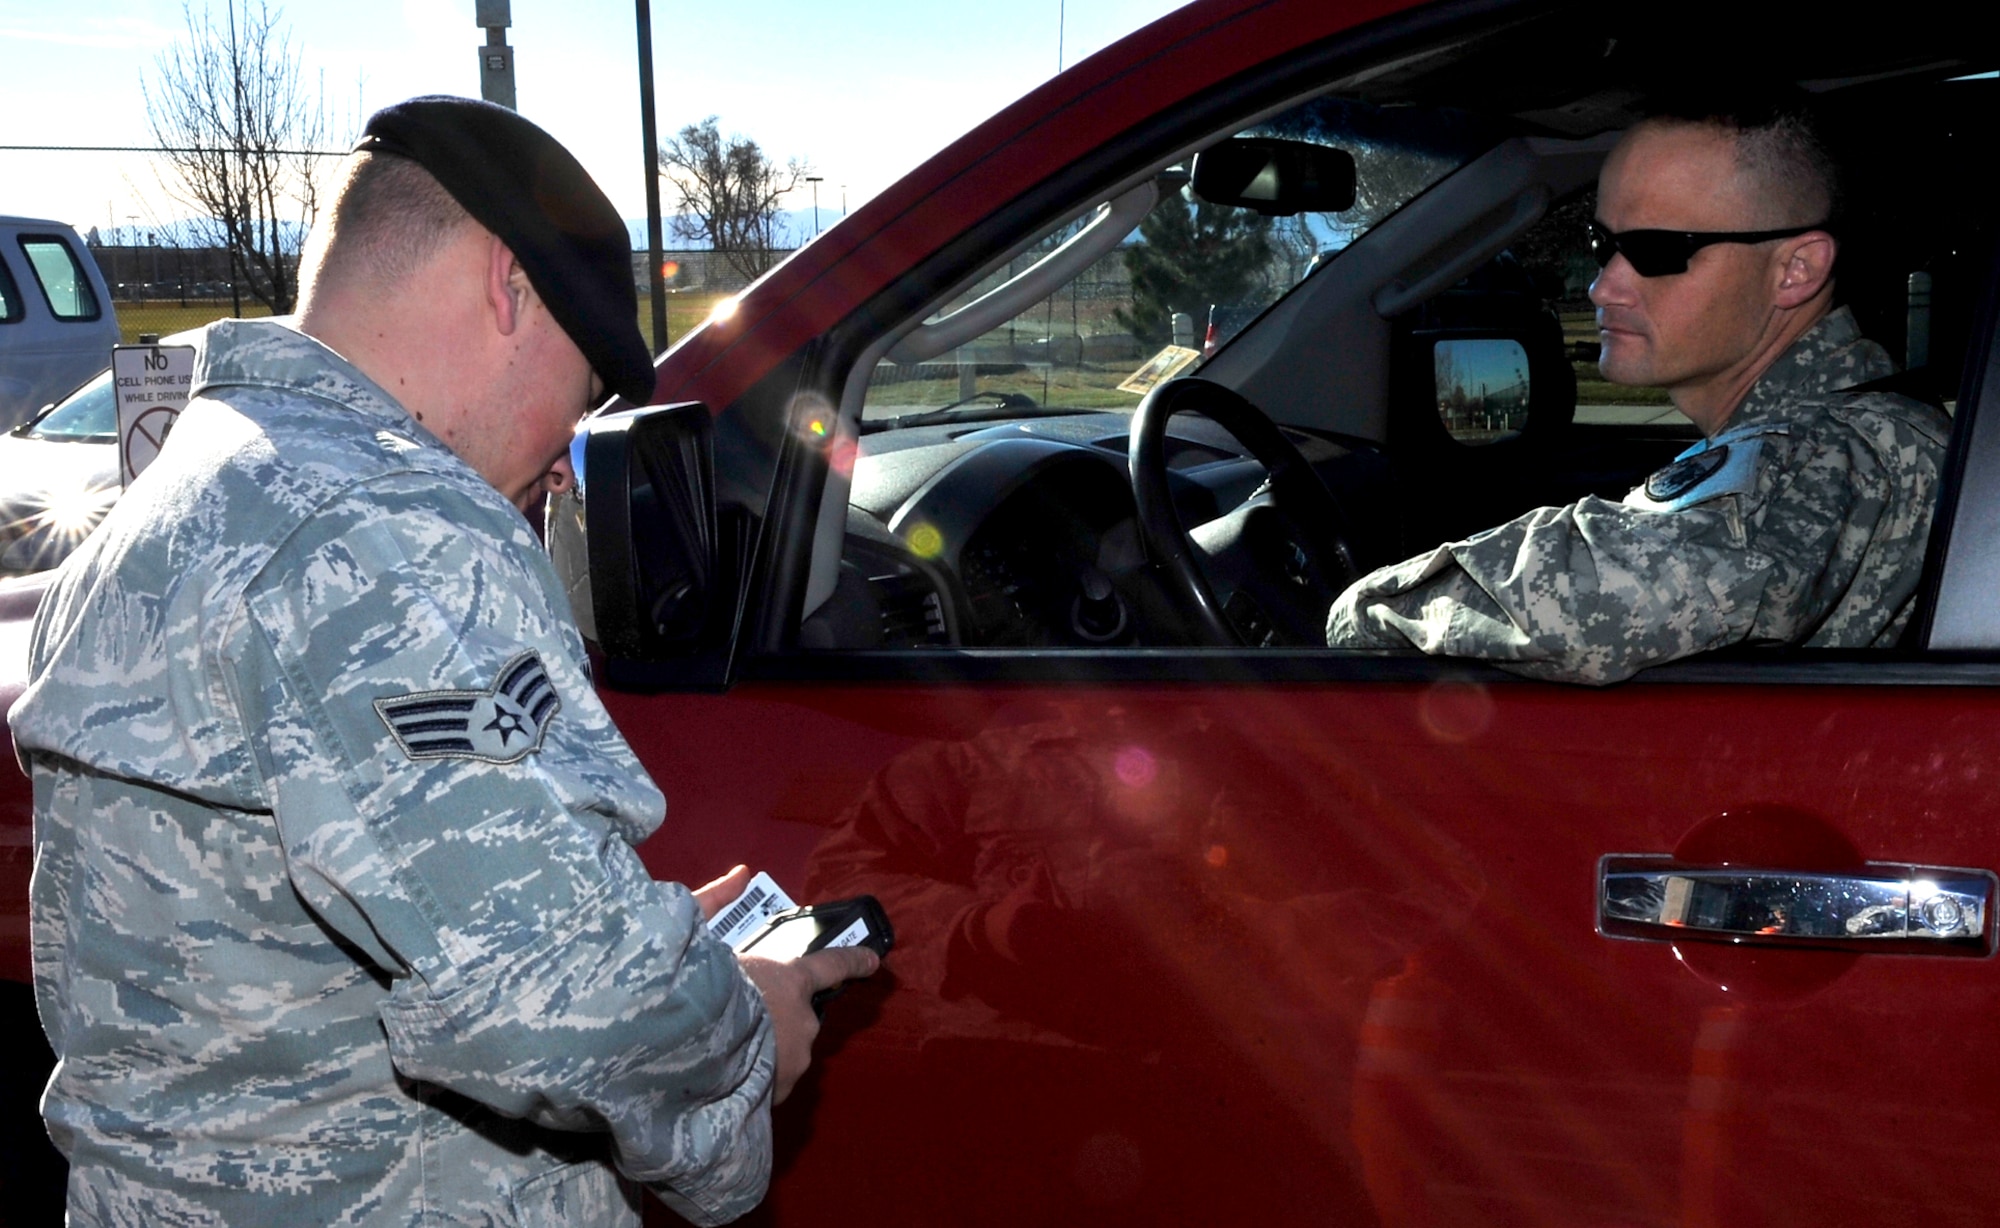 Senior Airman Derrick Morgan, 460th Security Forces Squadron scans a Common Access Card with the new DBIDS system implemented at Buckley Air Force Base Nov 23, 2010. This system is going to verify whether people are registered in DBIDS, or if their common access card has been reported lost or stolen, said Gilmore.(U.S. Air Force photo by Airman 1st Class Paul Labbe.)